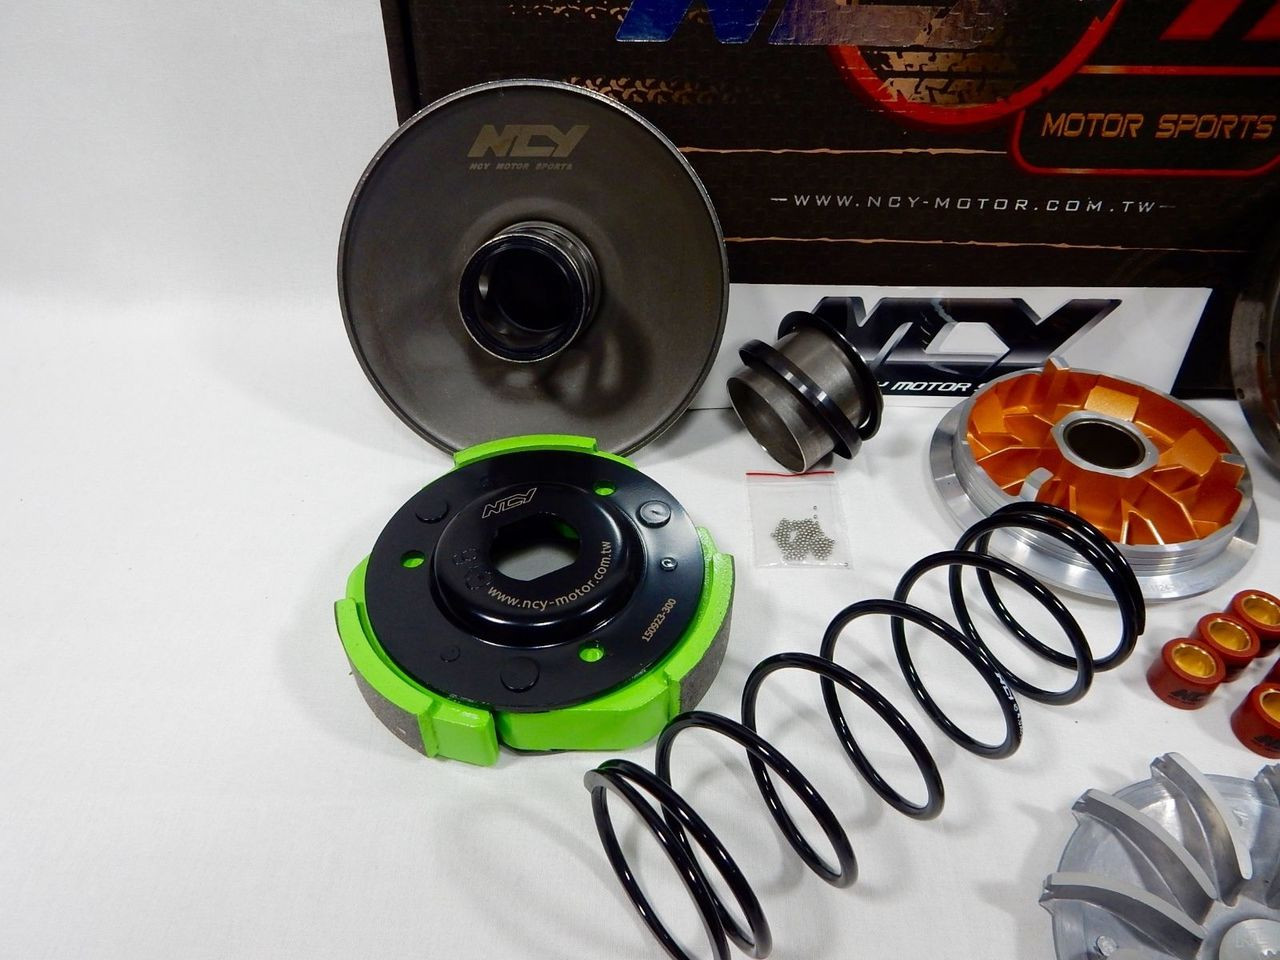 Ncy Performance Super Cvt Transmission Kit For Scooters With 150cc 232cc Gy6 Motors Gy6racing